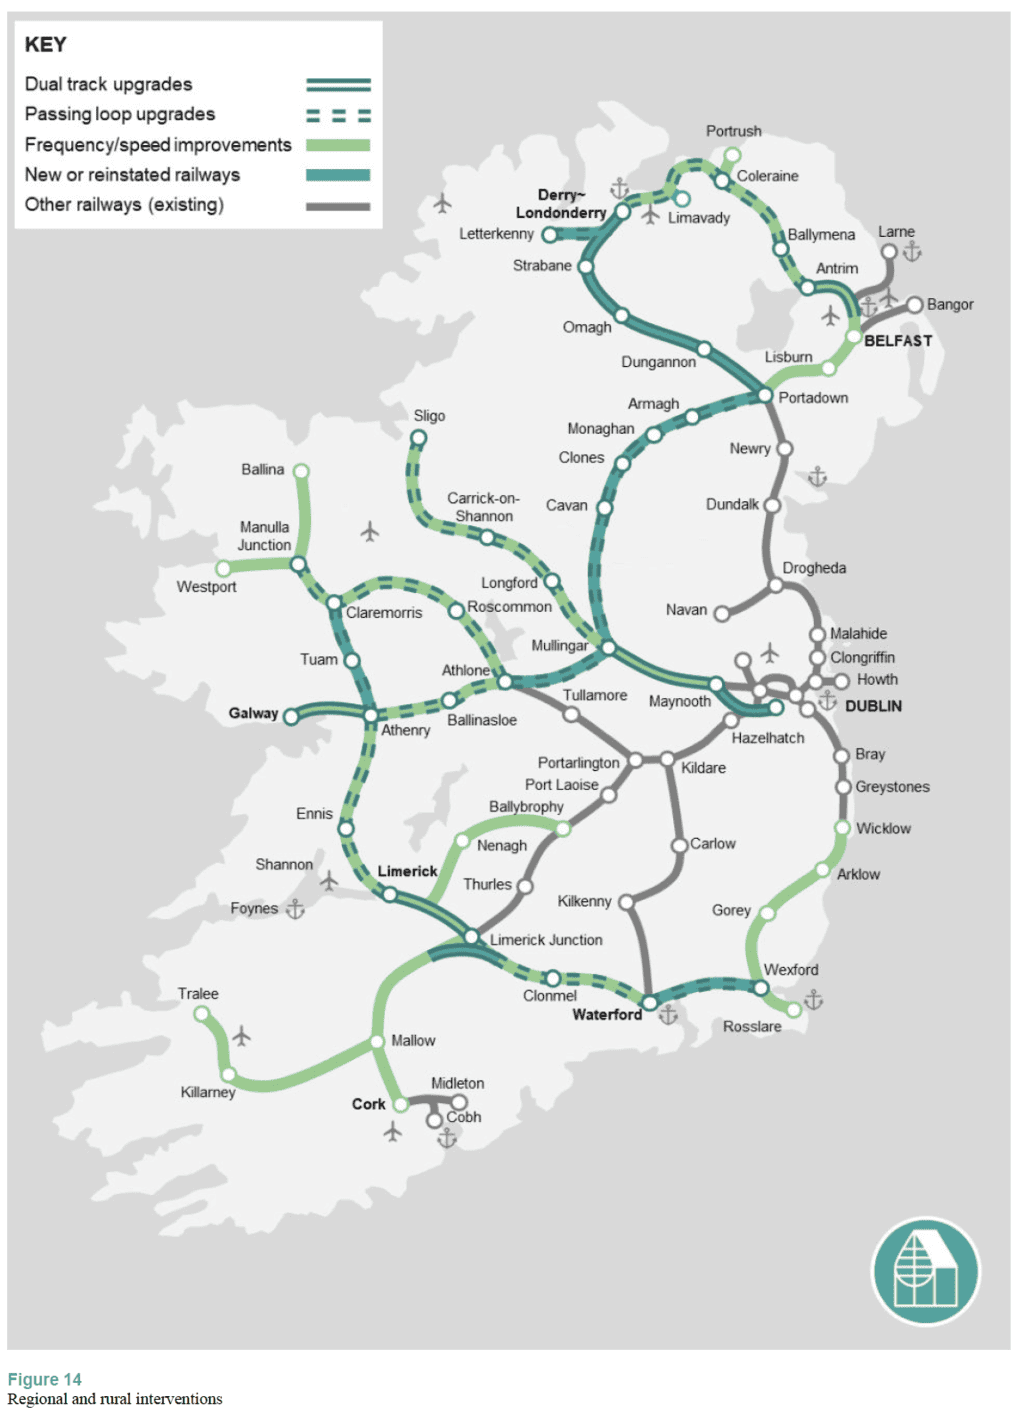 Regional and rural interventions rail map from All Island Rail Review